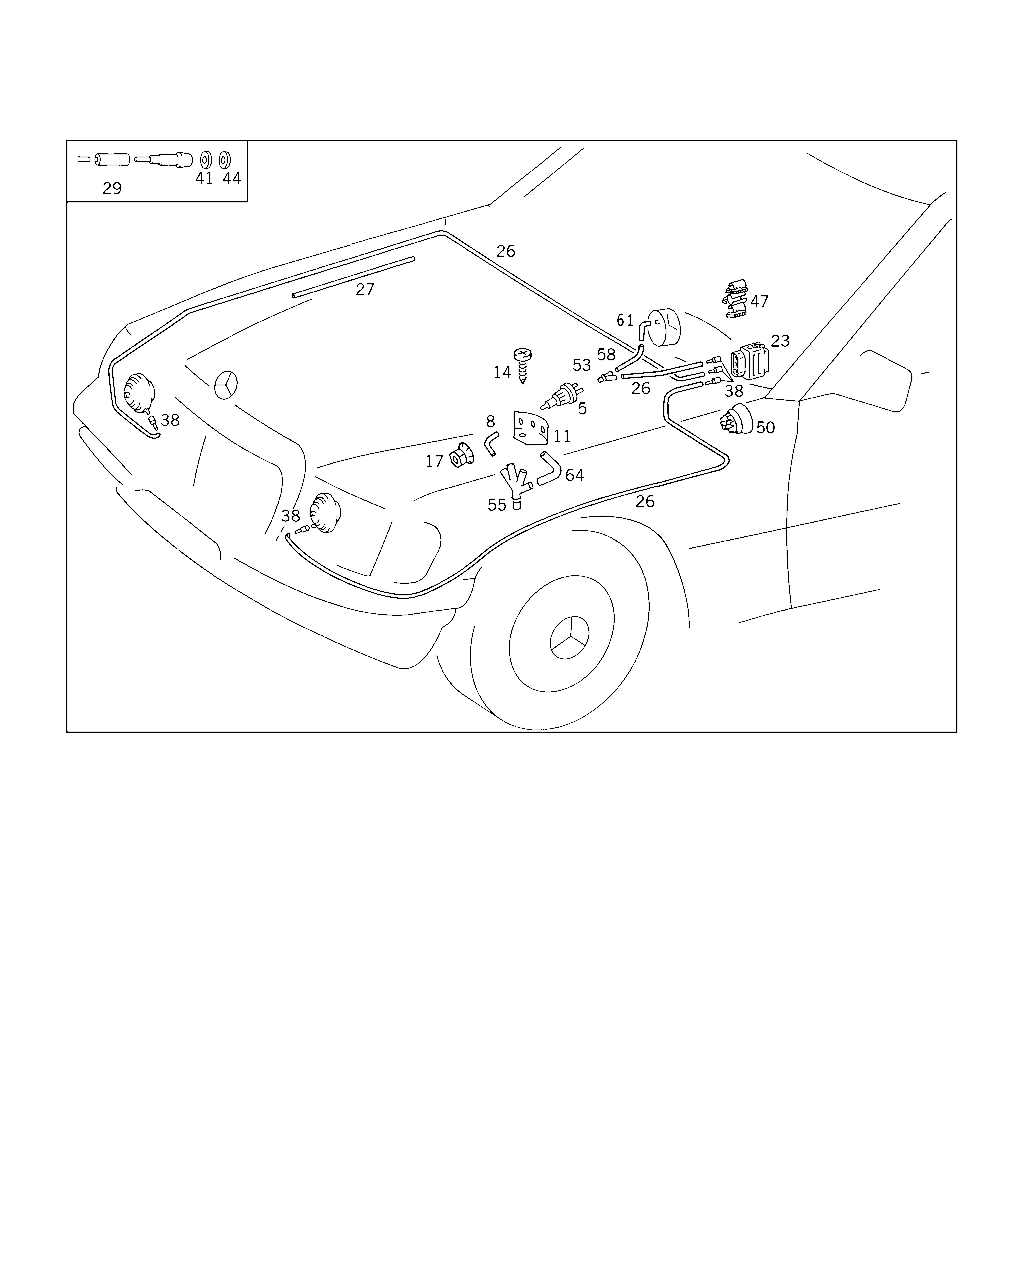 ENGINE VACUUM CONNECTION AND LIGHT RANGE REGULATOR [Car] MERCEDES [EUROPA] [CHASSIS]200